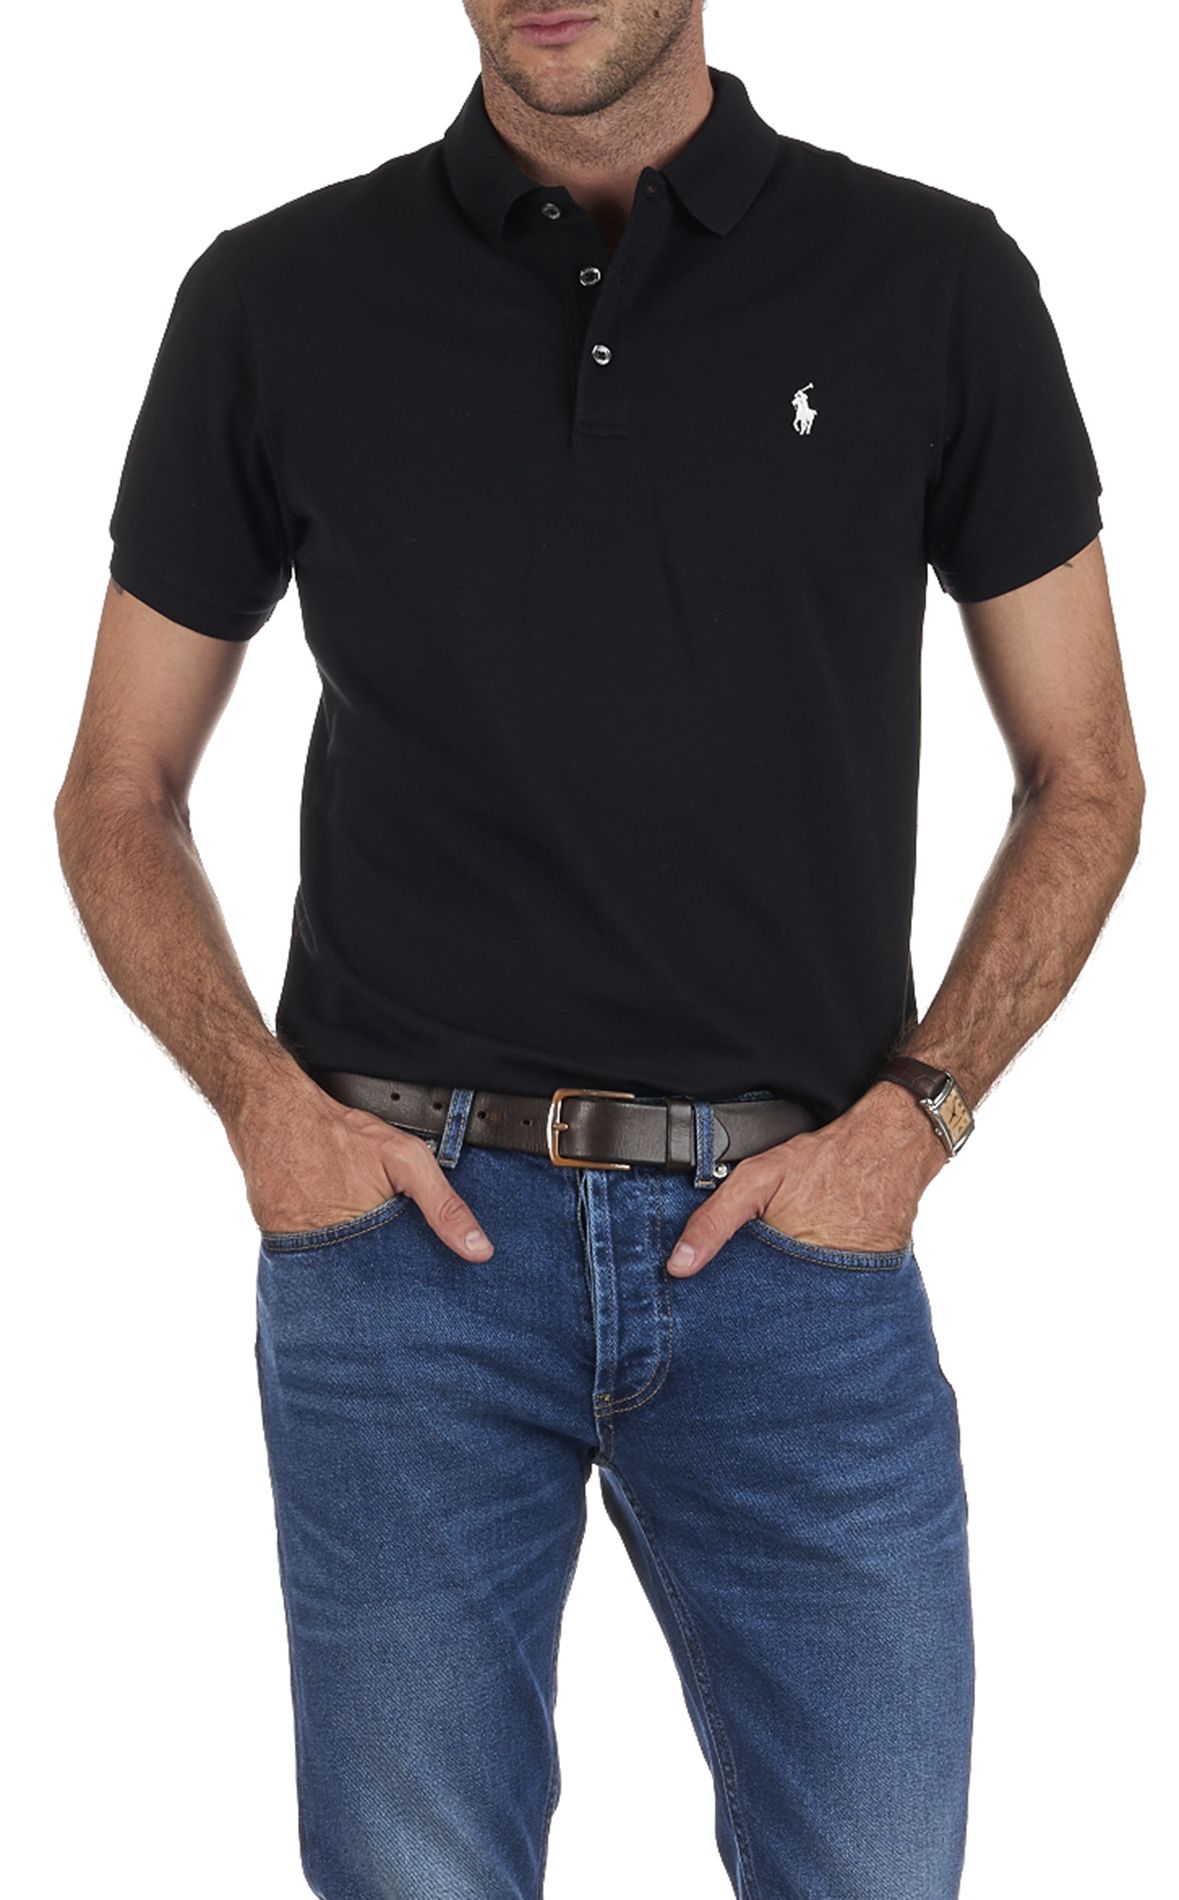 black fitted polo shirt